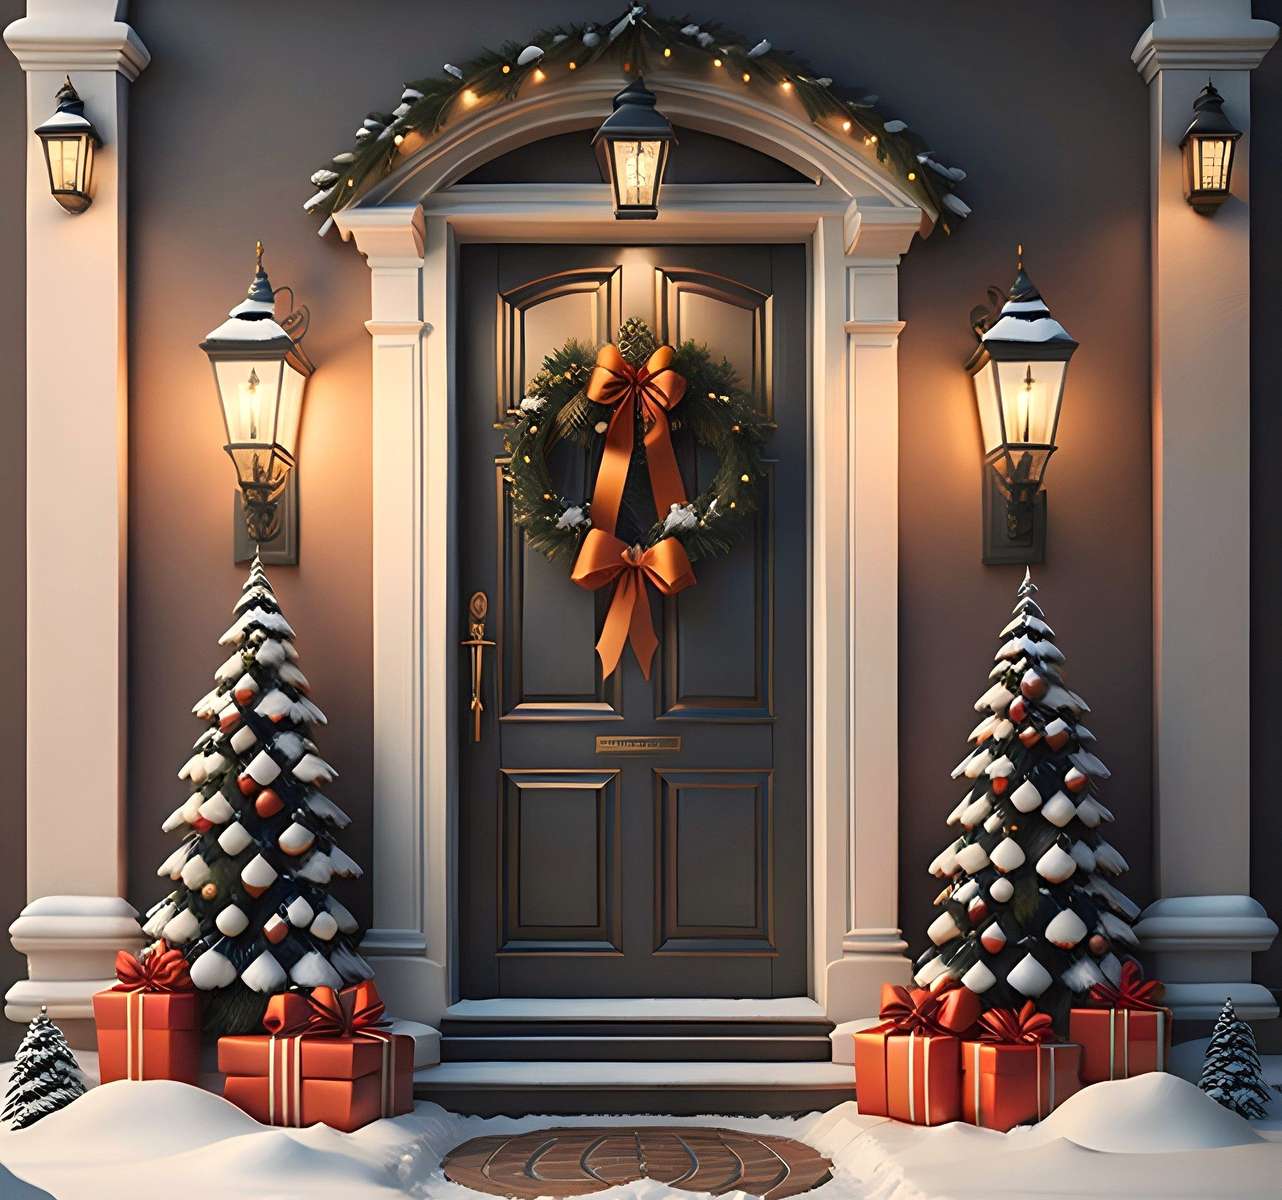 Christmas decorations in front of the entrance to the house jigsaw puzzle online